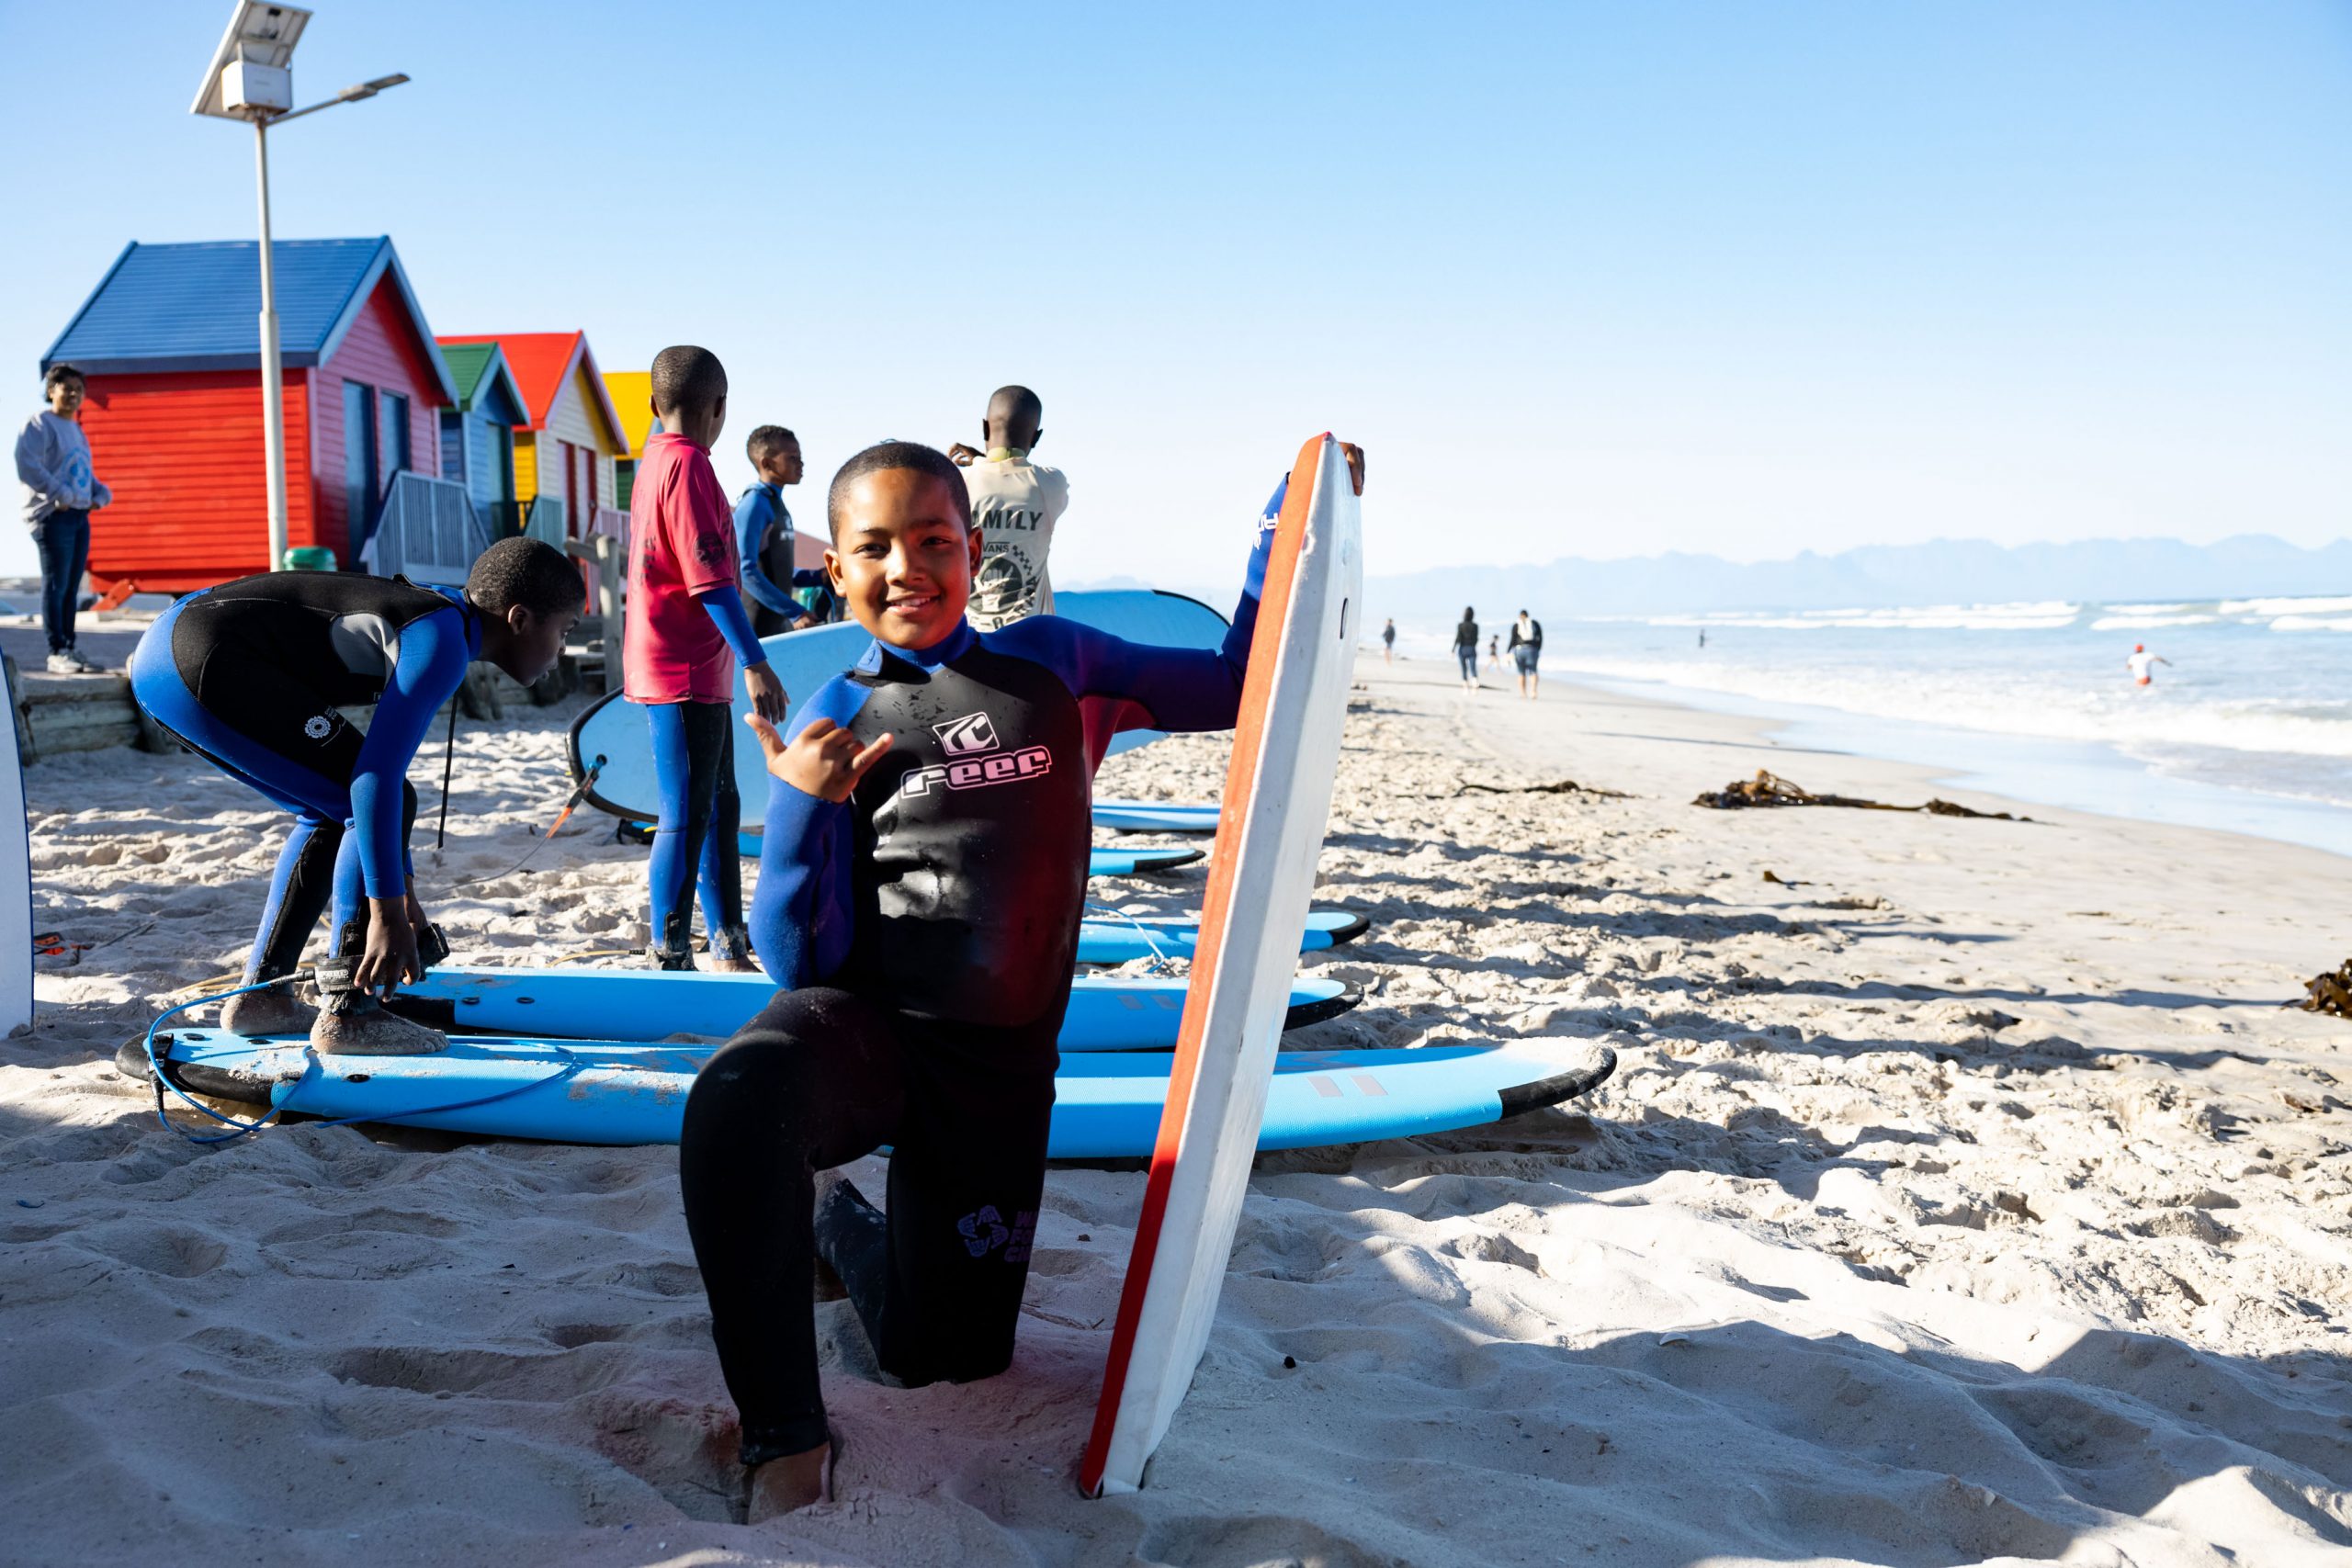 local children getting ready to surf